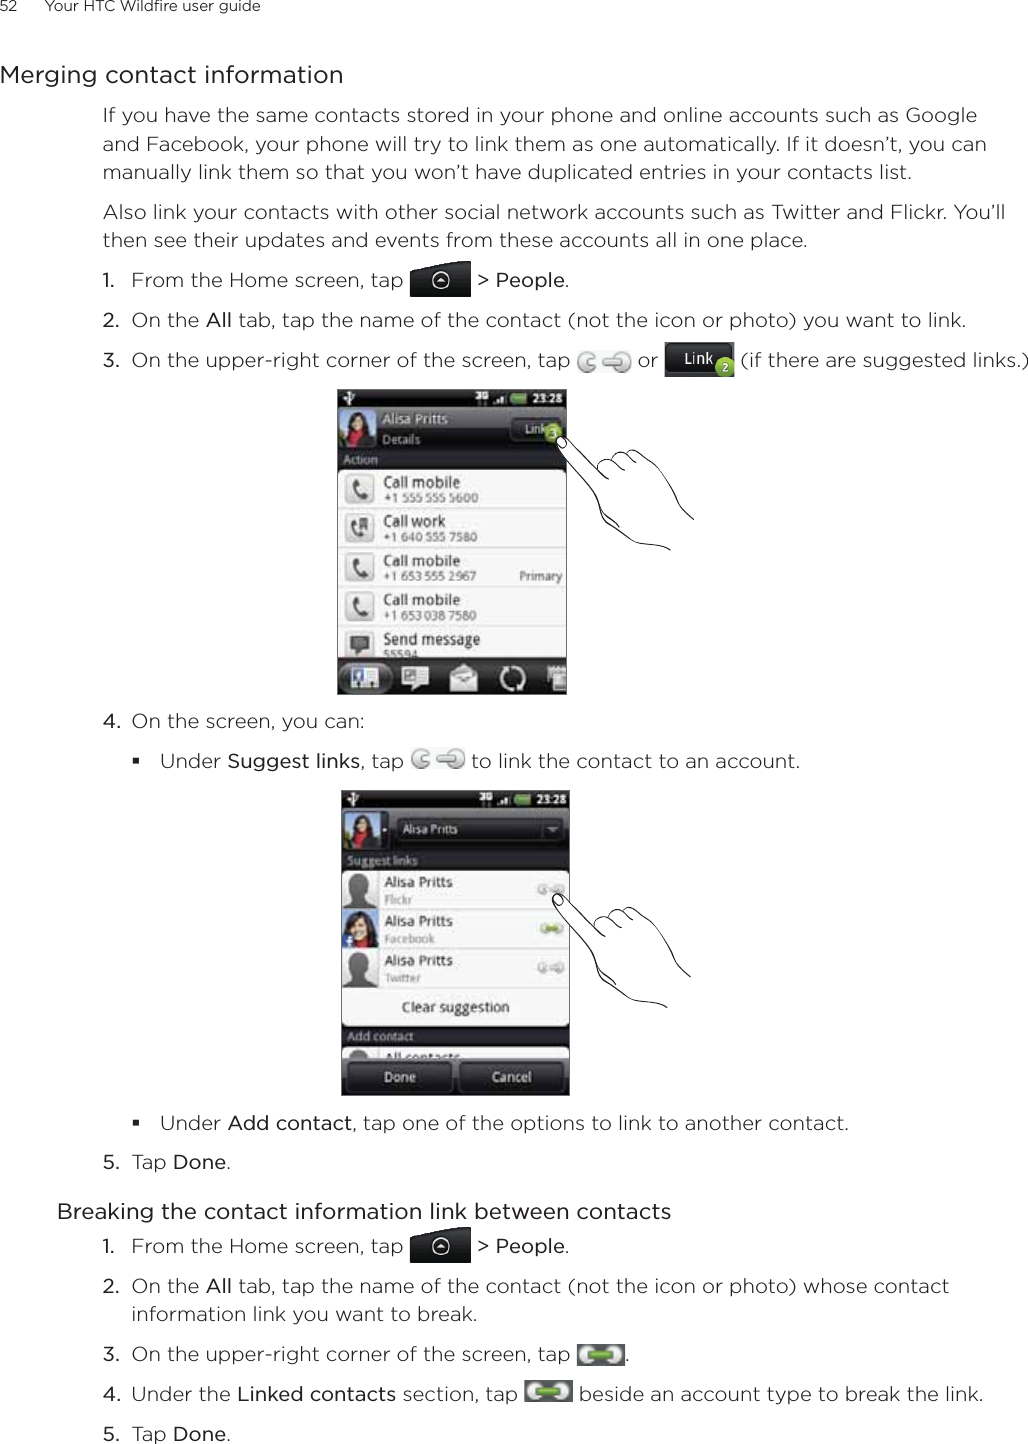 52      Your HTC Wildfire user guide      Merging contact informationIf you have the same contacts stored in your phone and online accounts such as Google and Facebook, your phone will try to link them as one automatically. If it doesn’t, you can manually link them so that you won’t have duplicated entries in your contacts list.Also link your contacts with other social network accounts such as Twitter and Flickr. You’ll then see their updates and events from these accounts all in one place.From the Home screen, tap   &gt; People.On the All tab, tap the name of the contact (not the icon or photo) you want to link.On the upper-right corner of the screen, tap   or   (if there are suggested links.)4.  On the screen, you can:Under Suggest links, tap   to link the contact to an account.Under Add contact, tap one of the options to link to another contact.5.  Tap Done. Breaking the contact information link between contactsFrom the Home screen, tap   &gt; People.On the All tab, tap the name of the contact (not the icon or photo) whose contact information link you want to break.On the upper-right corner of the screen, tap  .Under the Linked contacts section, tap   beside an account type to break the link. Tap Done. 1.2.3.1.2.3.4.5.